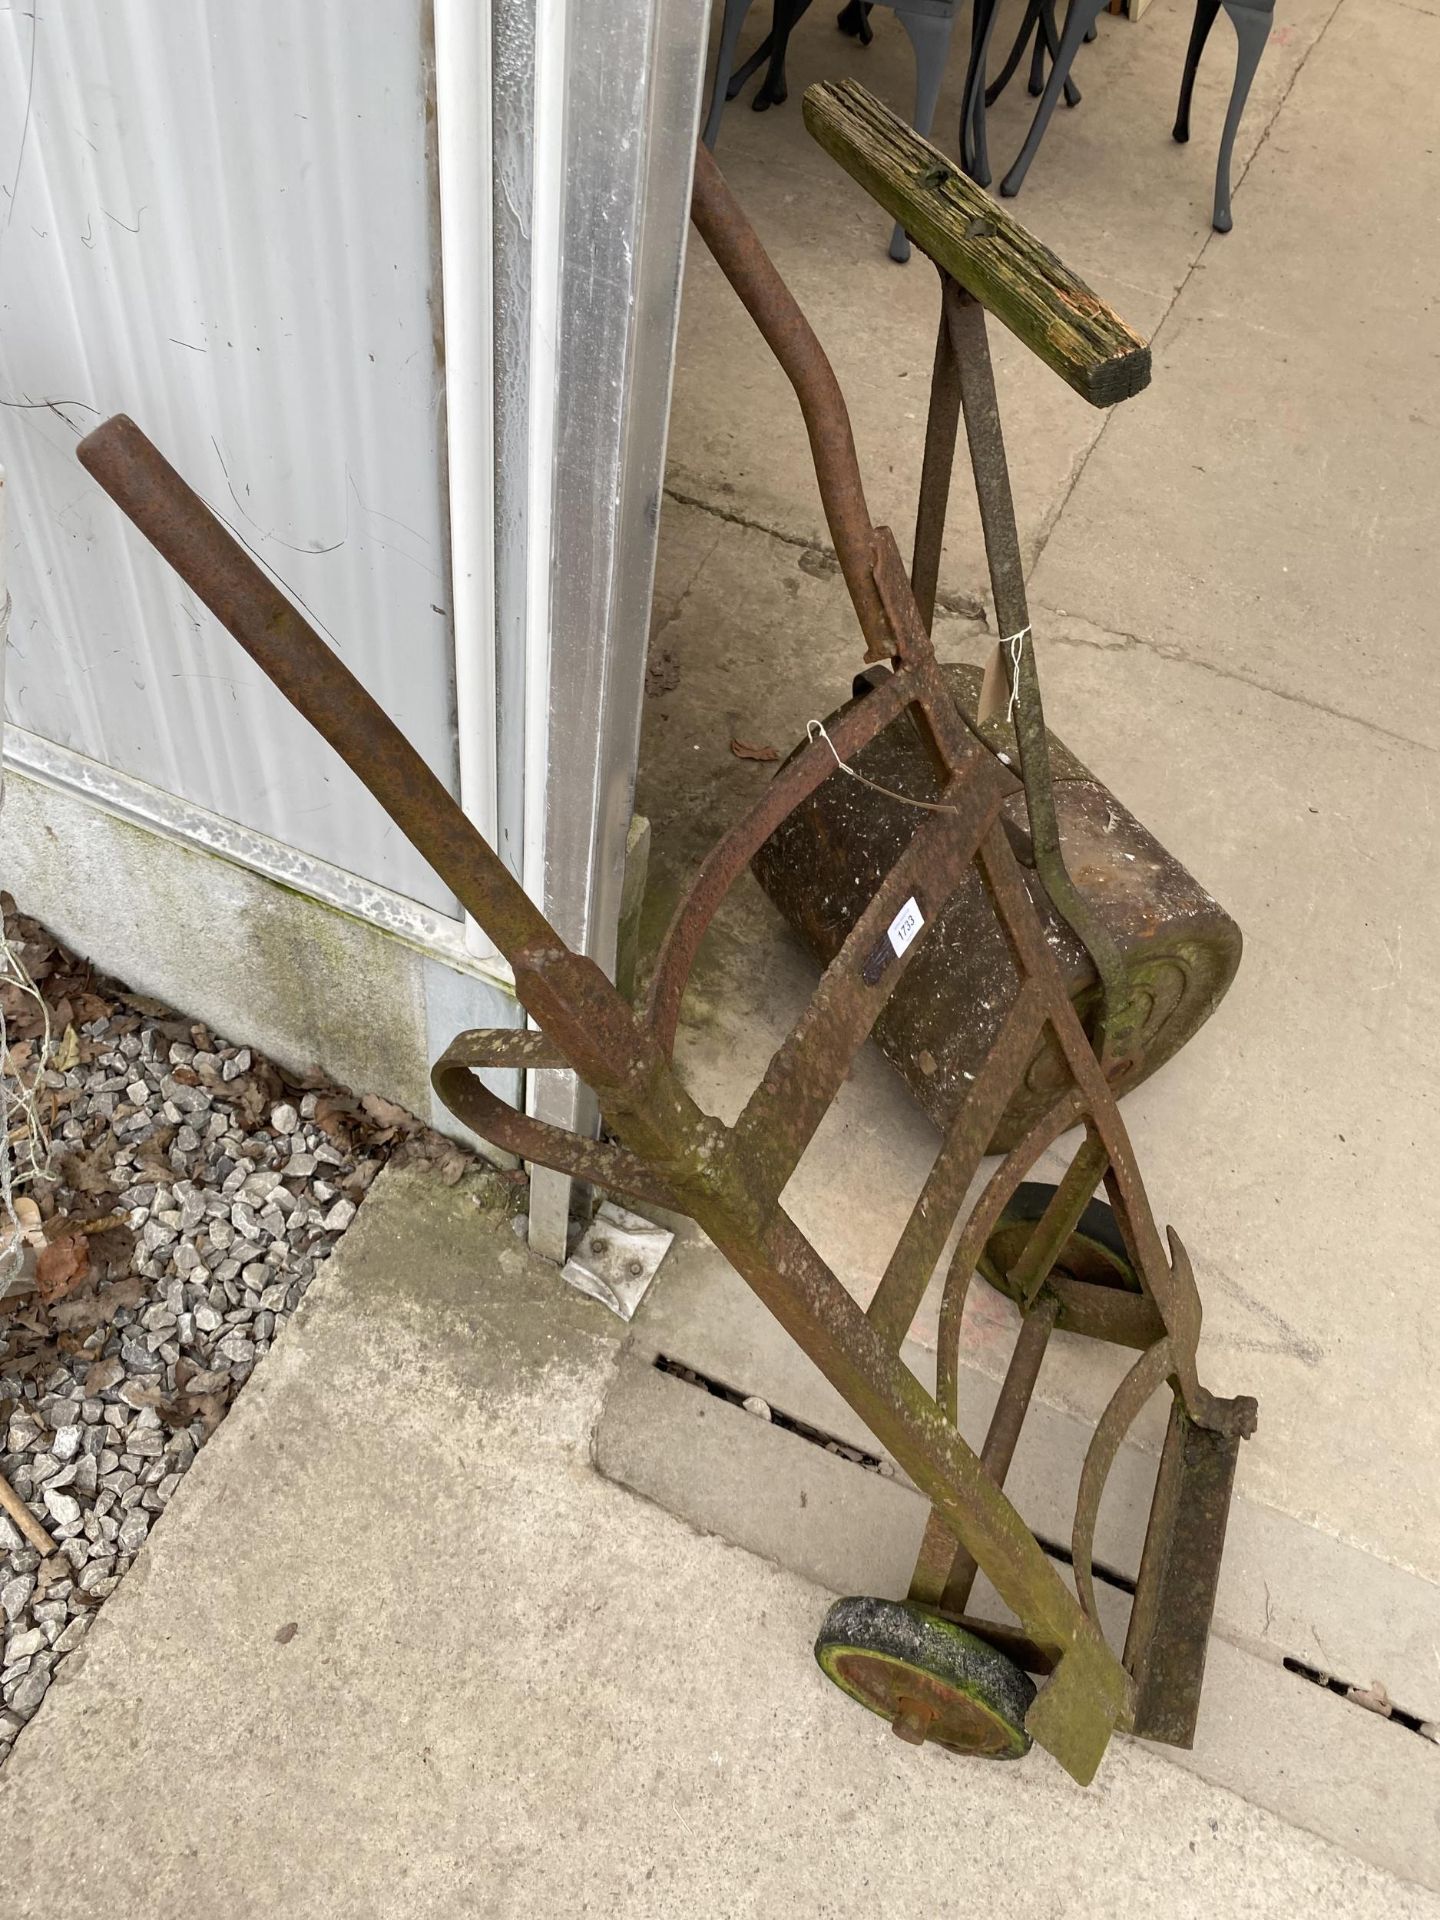 A VINTAGE METAL SACK TRUCK AND A GARDEN ROLLER - Image 3 of 3